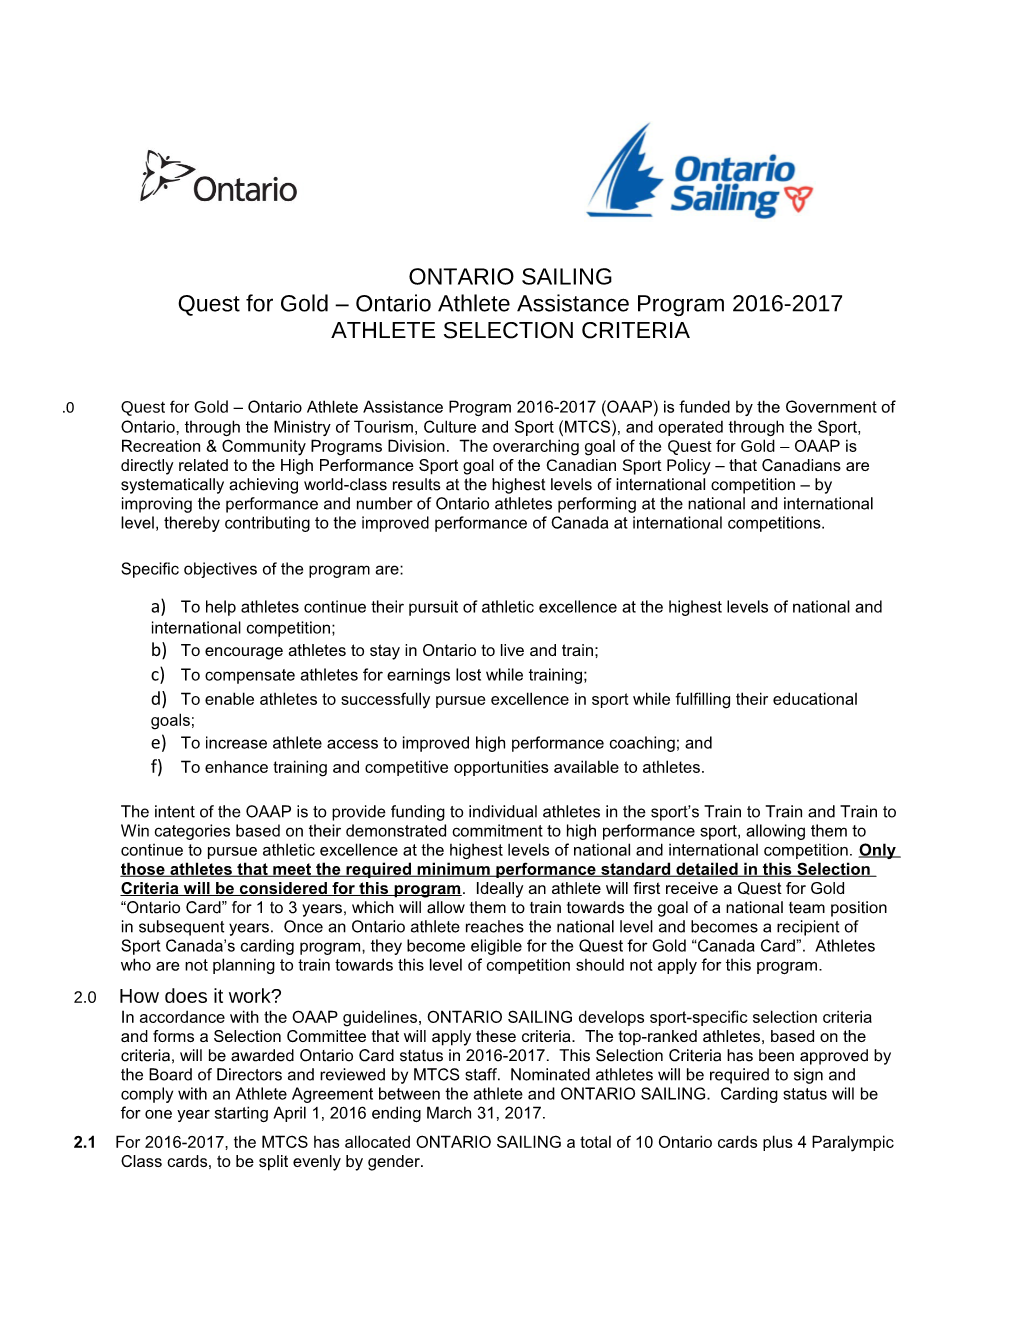 Quest for Gold Ontario Athlete Assistance Program 2016-2017